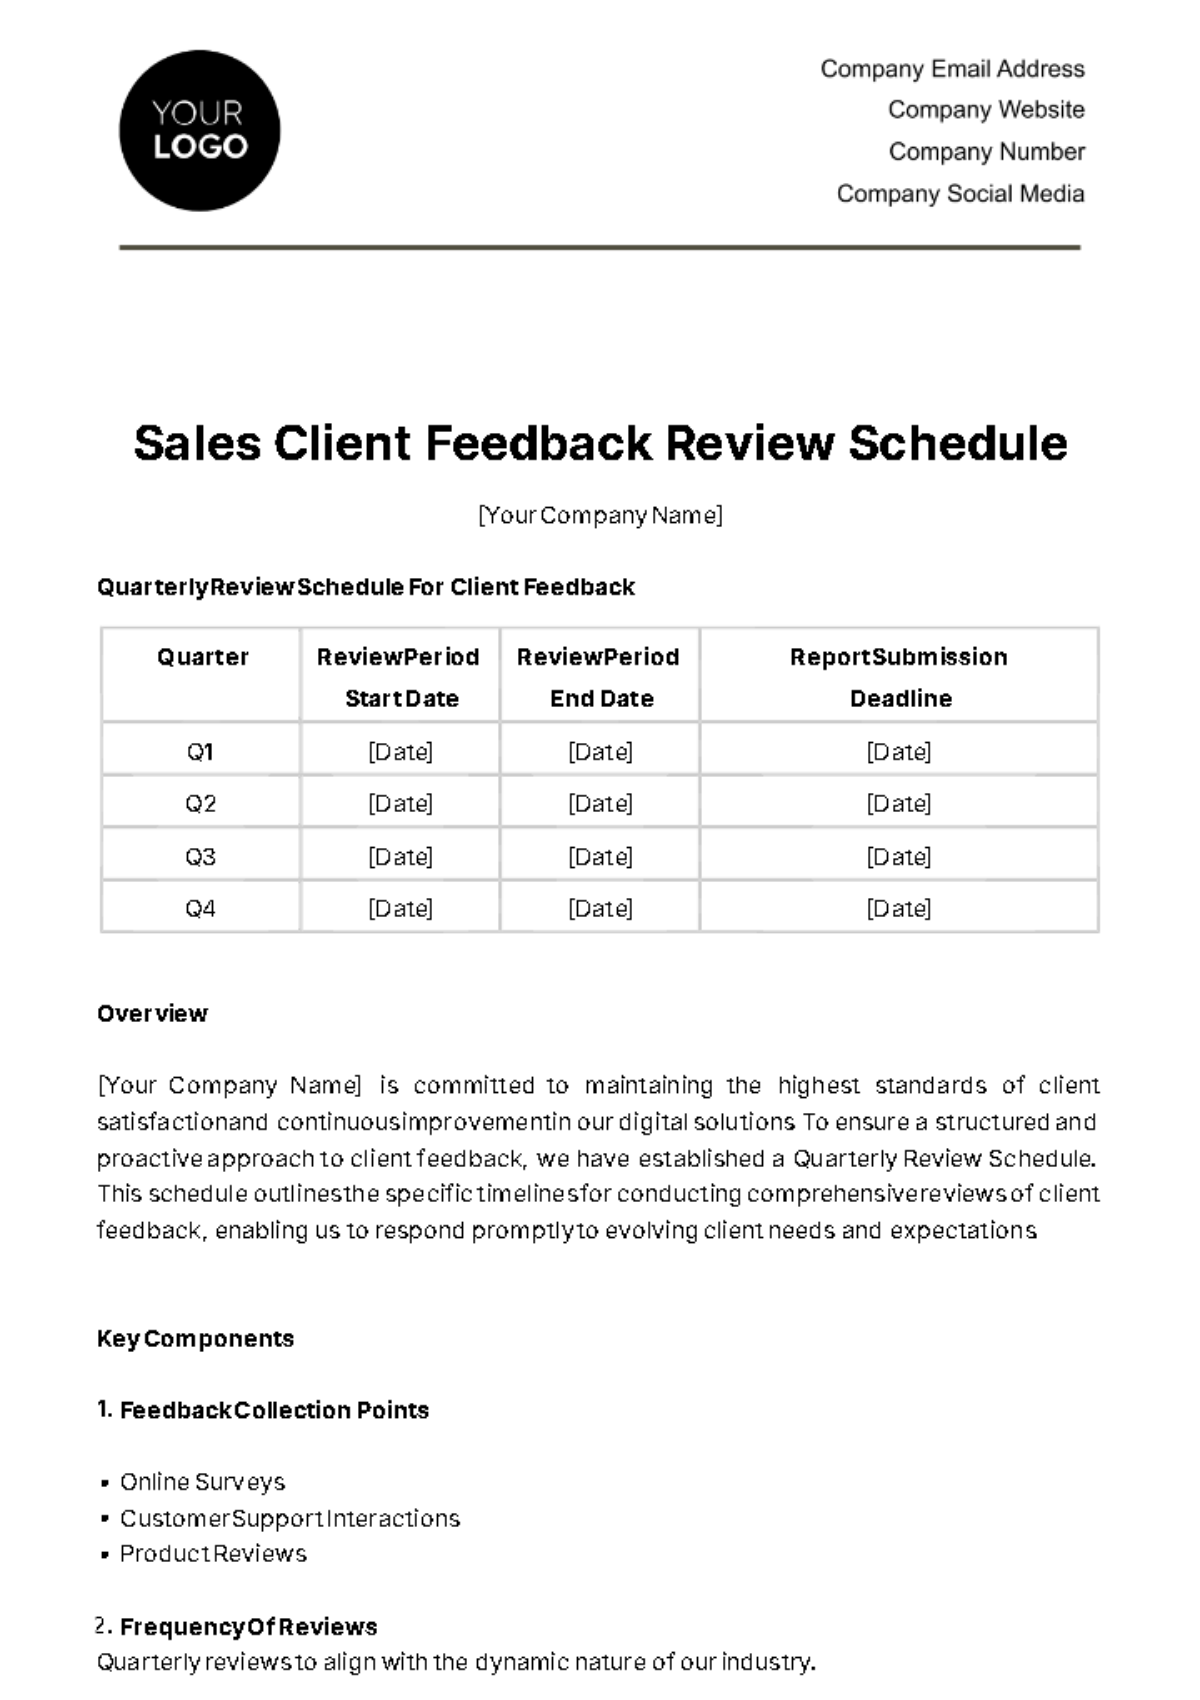 Free Sales Client Feedback Review Schedule Template